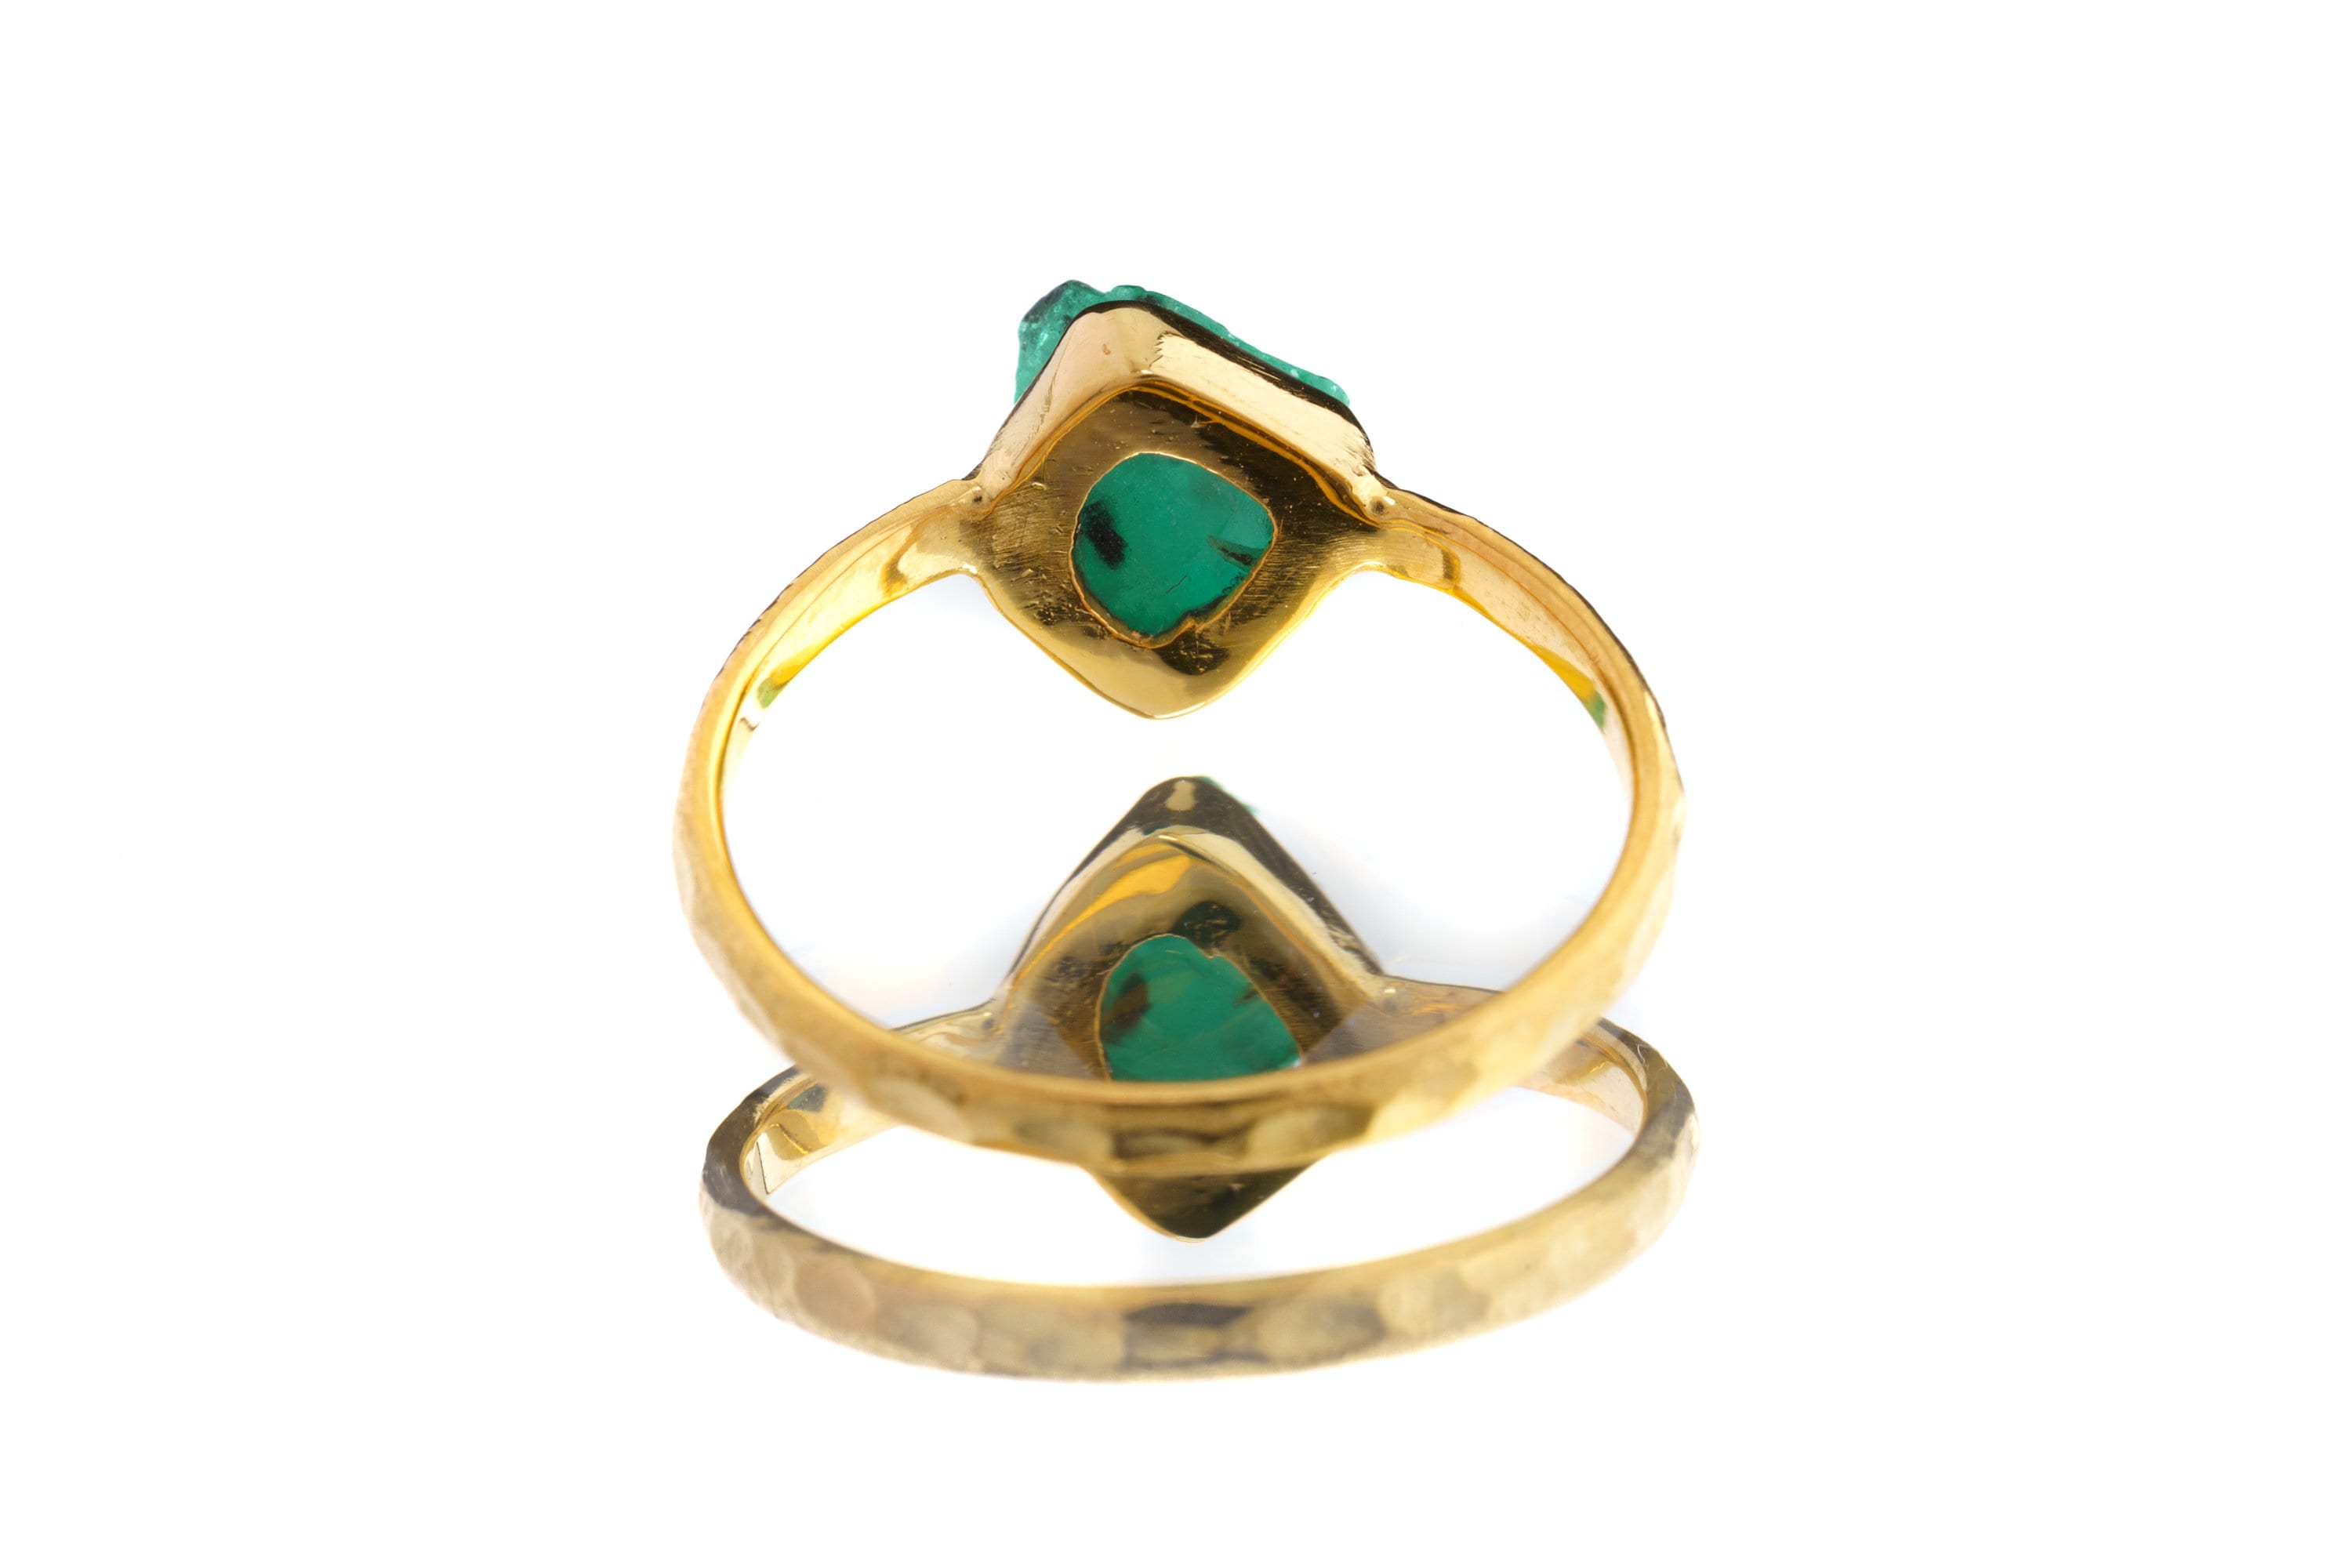 Austral Gem - Australian Raw Emerald - Size 5 1/4 US - Gold Plated Crystal Ring